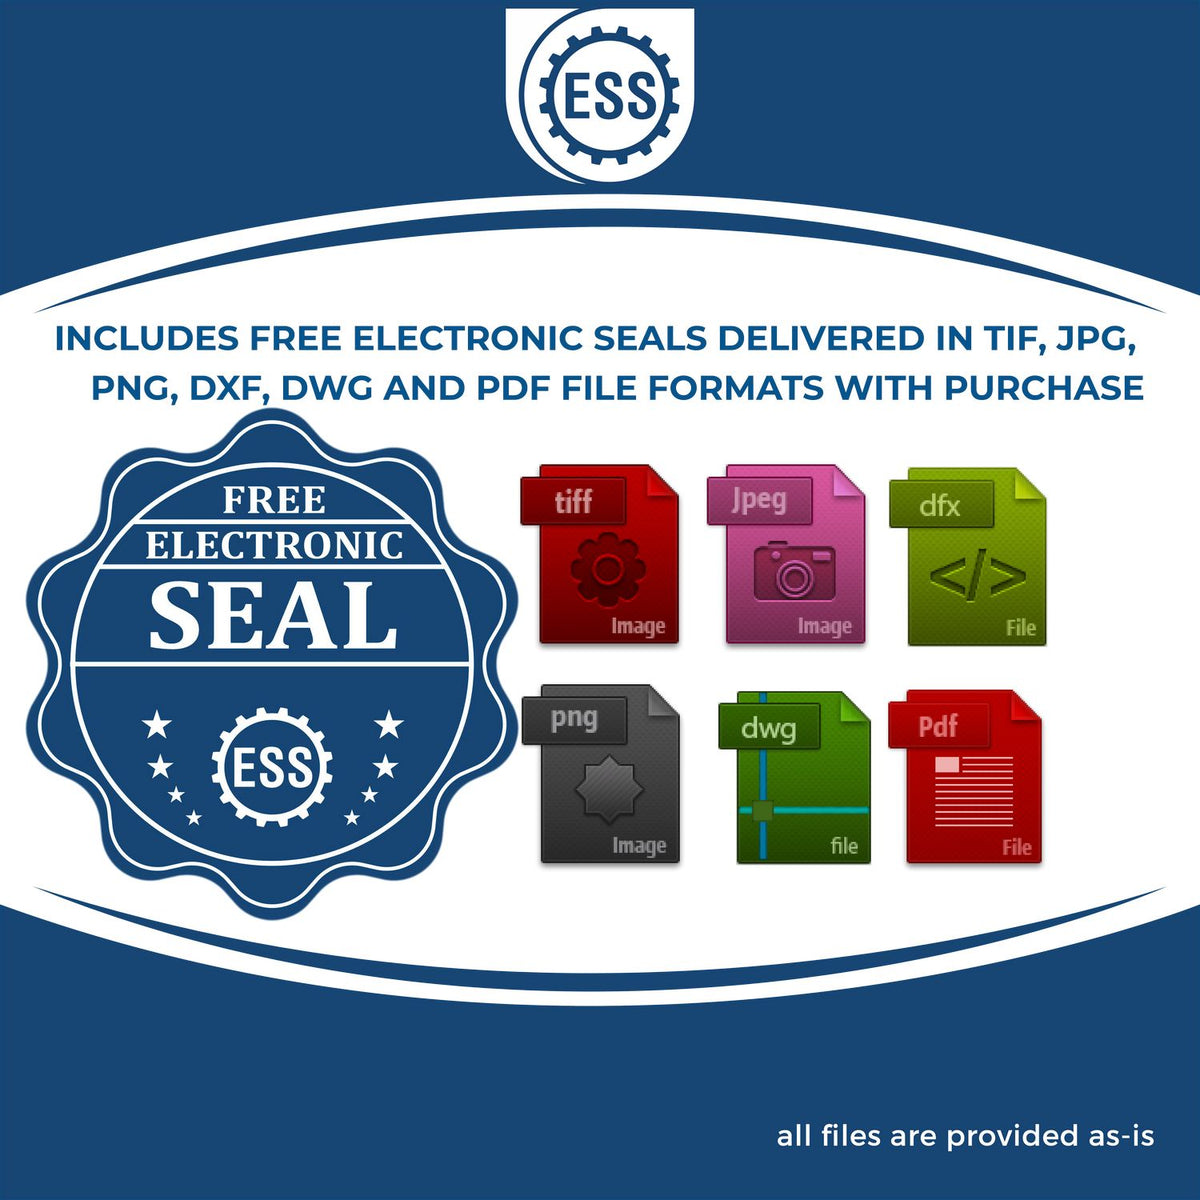 An infographic for the free electronic seal for the State of Montana Extended Long Reach Engineer Seal illustrating the different file type icons such as DXF, DWG, TIF, JPG and PNG.